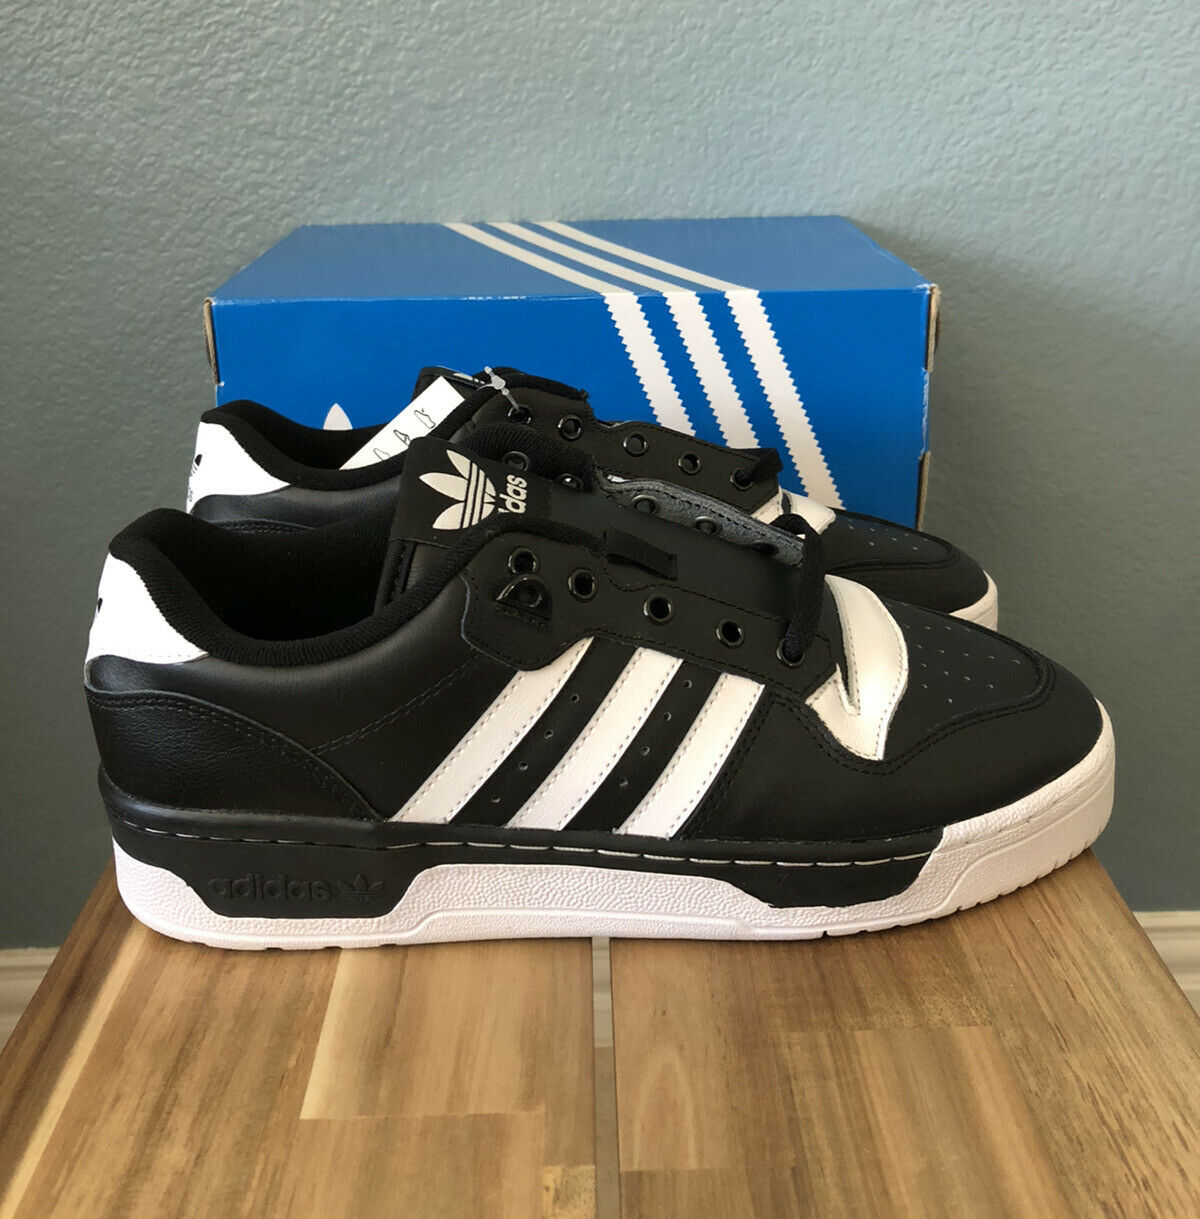 Adidas Rivalry Low Men’s Leather Shoes Size 10 Black/White - Design In France